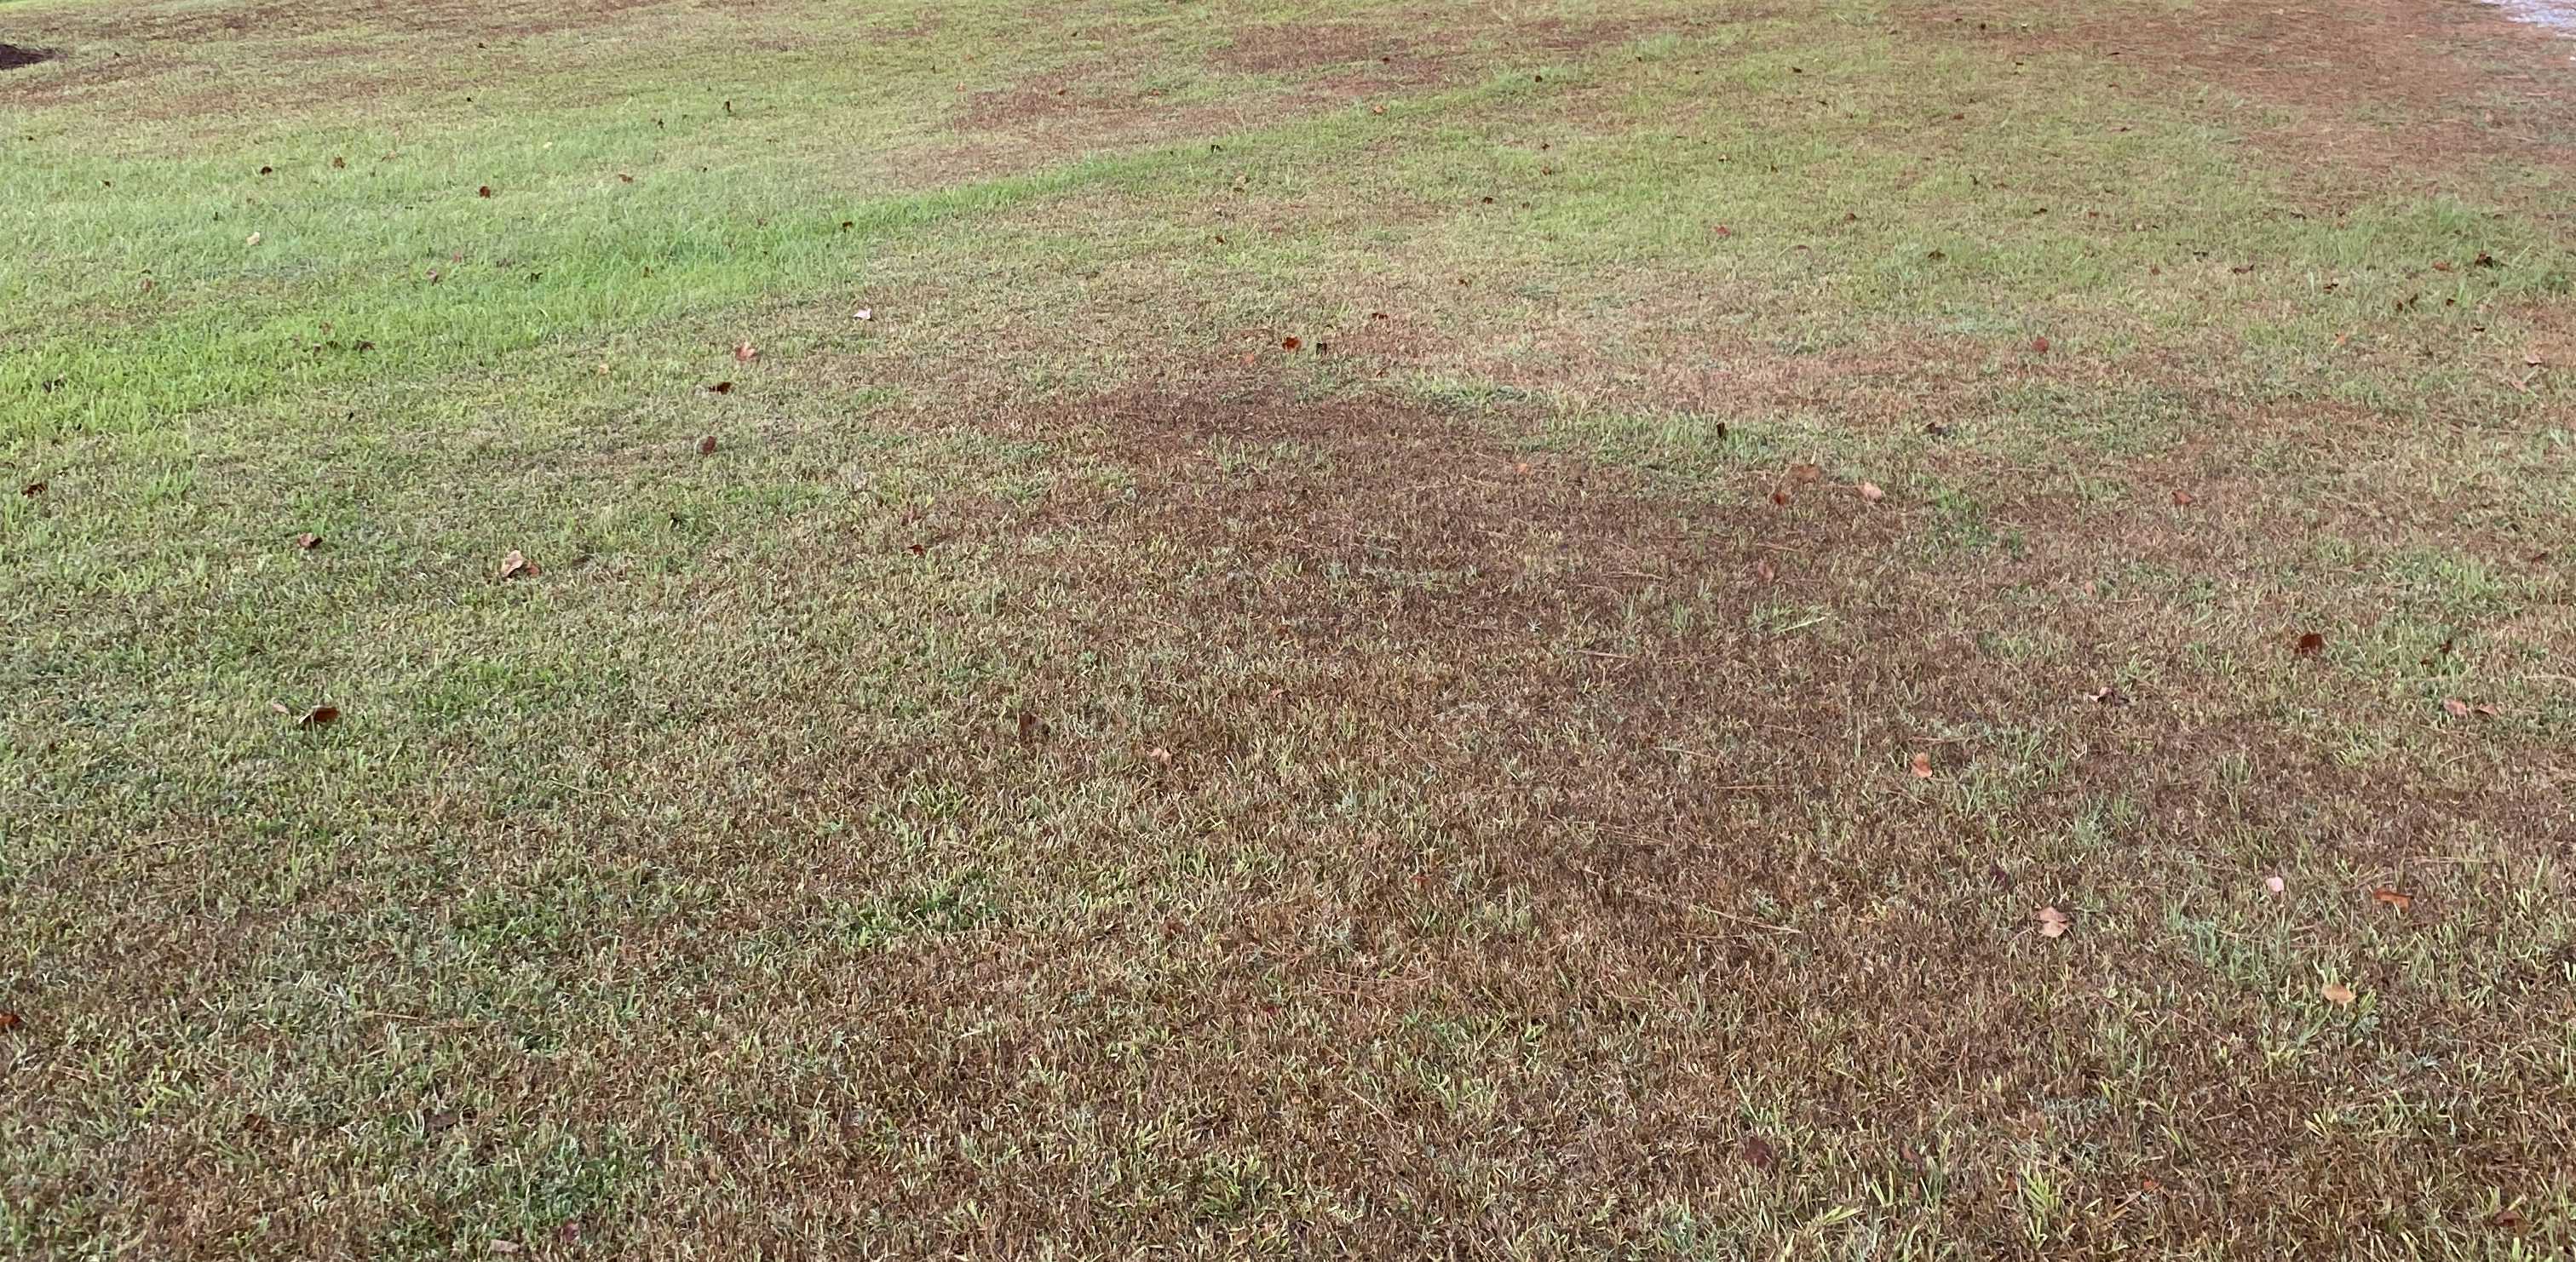 Huge patches of brown, dead grass cover a yard in between a pond and house